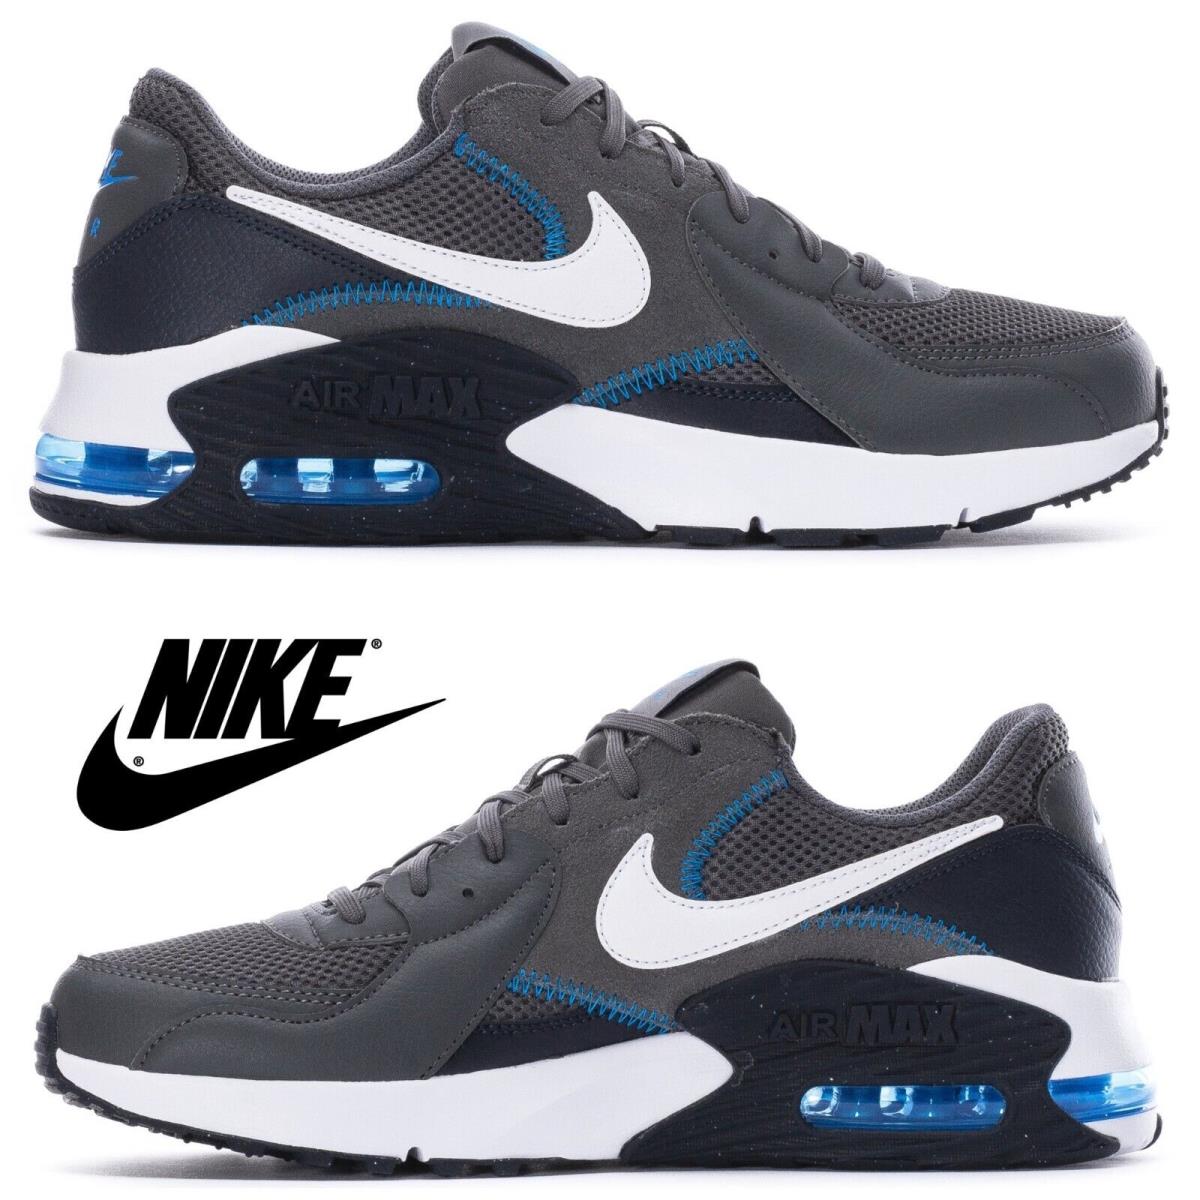 Nike Air Max Excee Men`s Sneakers Comfort Casual Sport Running Shoes Gray - Gray, Manufacturer: Iron Grey/White/Photo Blue/Dk Obsidian